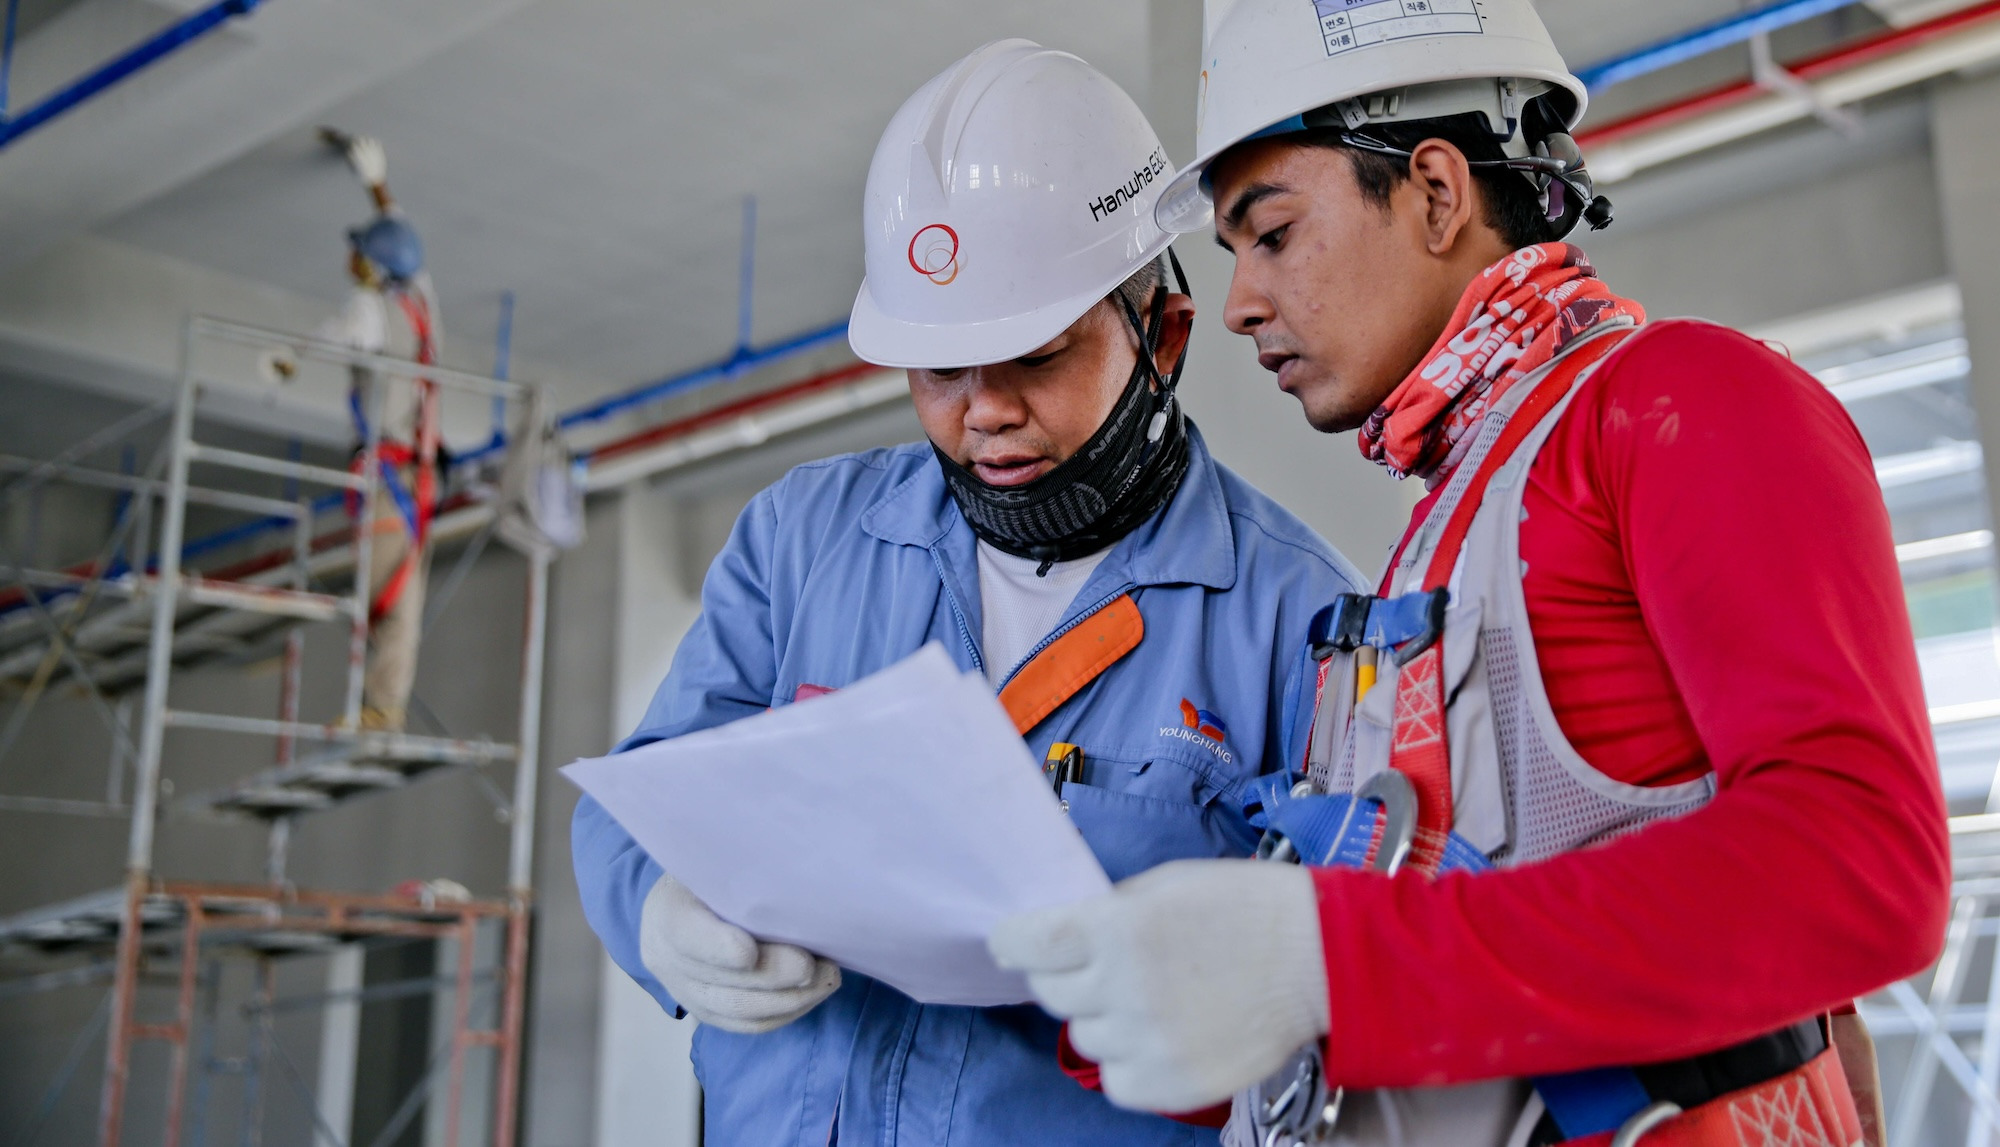 Two construction workers review a document with worksite policies.